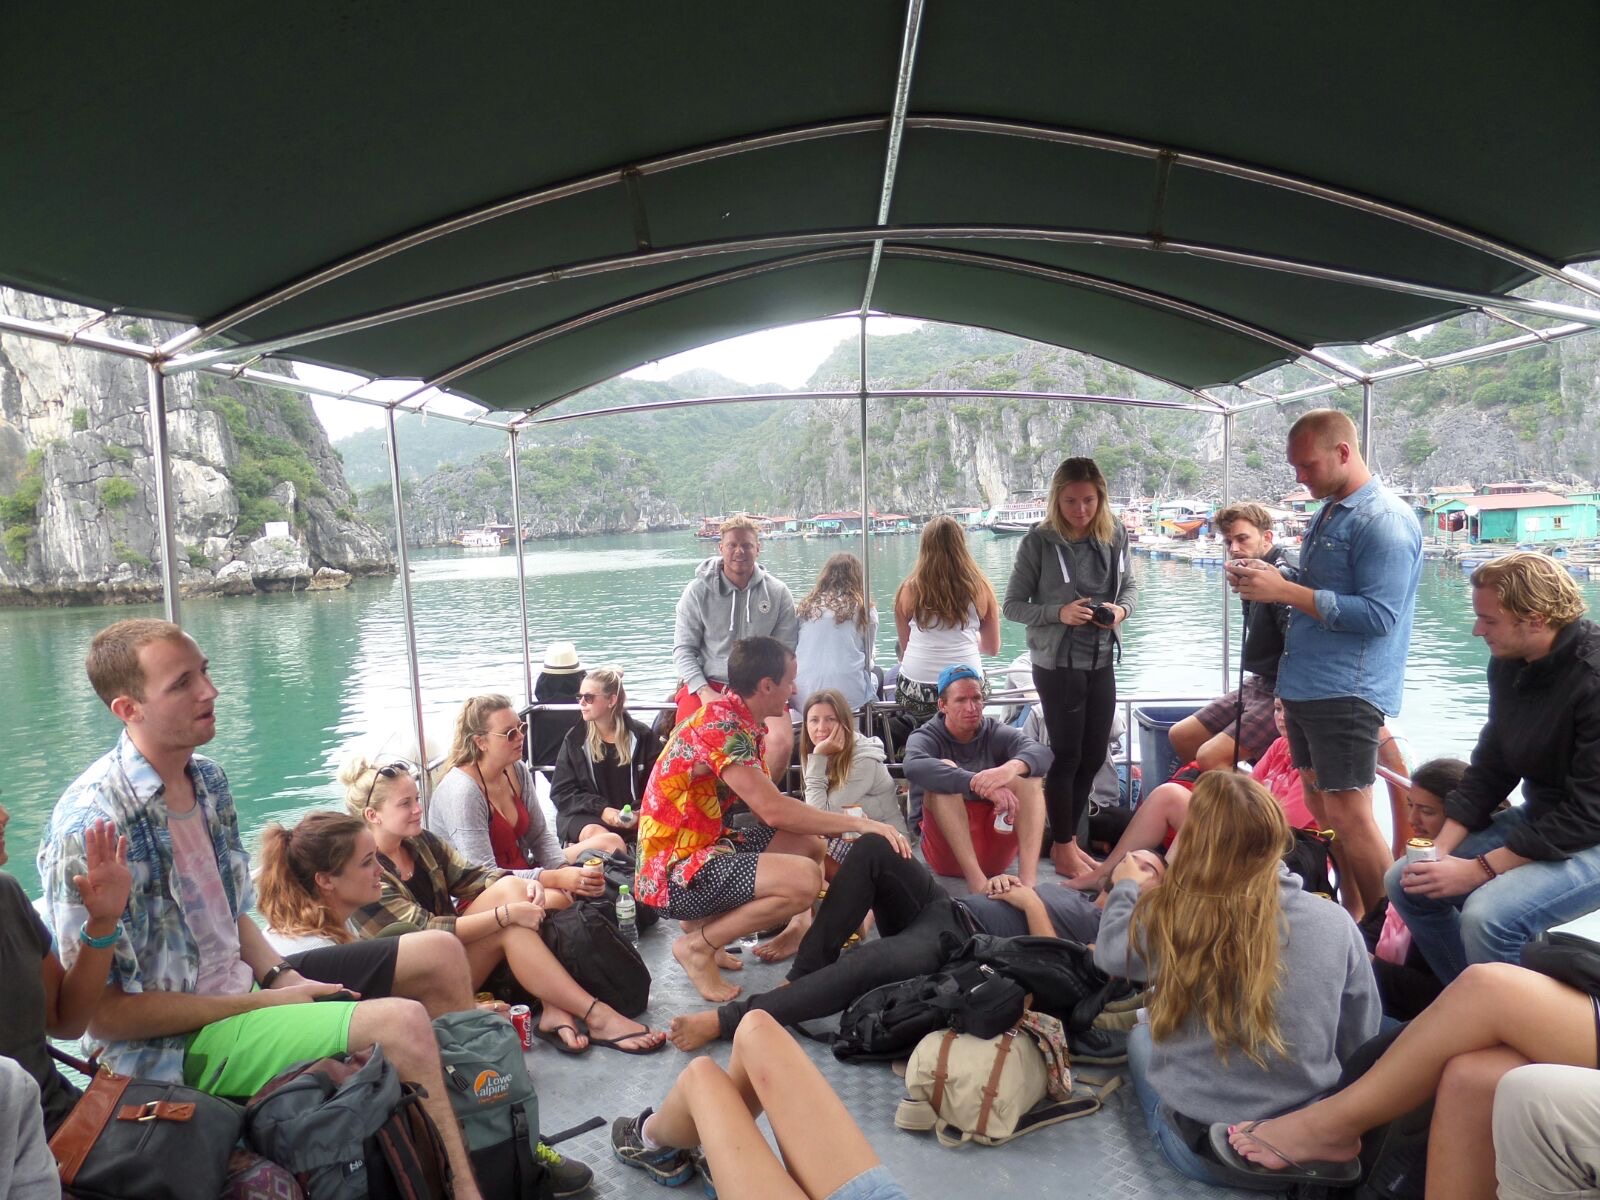 David Simpson and friends on a boat in Ha Long Bay, Vietnam. Wake boarding and back to Hanoi